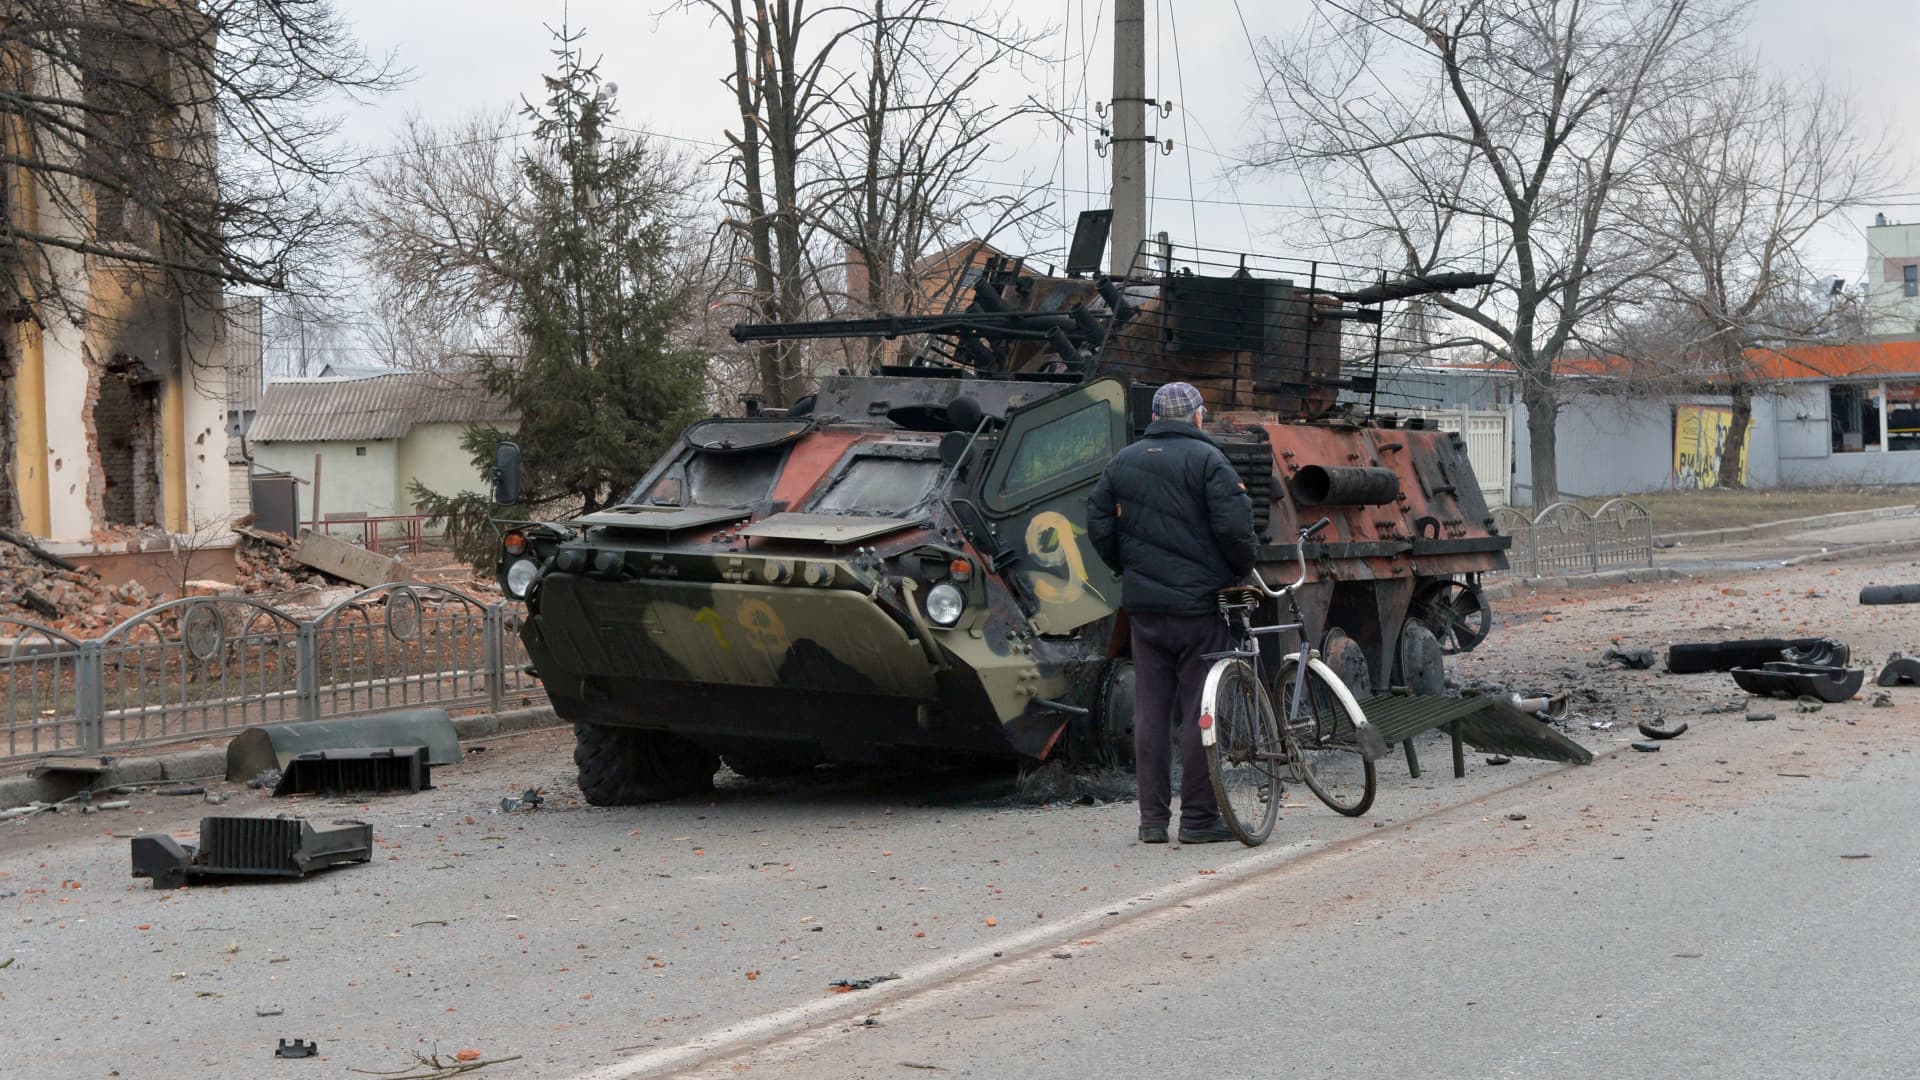 A man looks at an Ukrainian armored personnel carrierBTR-4 destroyed as a result of fight not far from the center of Ukrainian city of Kharkiv, located some 50 km from Ukrainian-Russian border, on February 28, 2022.